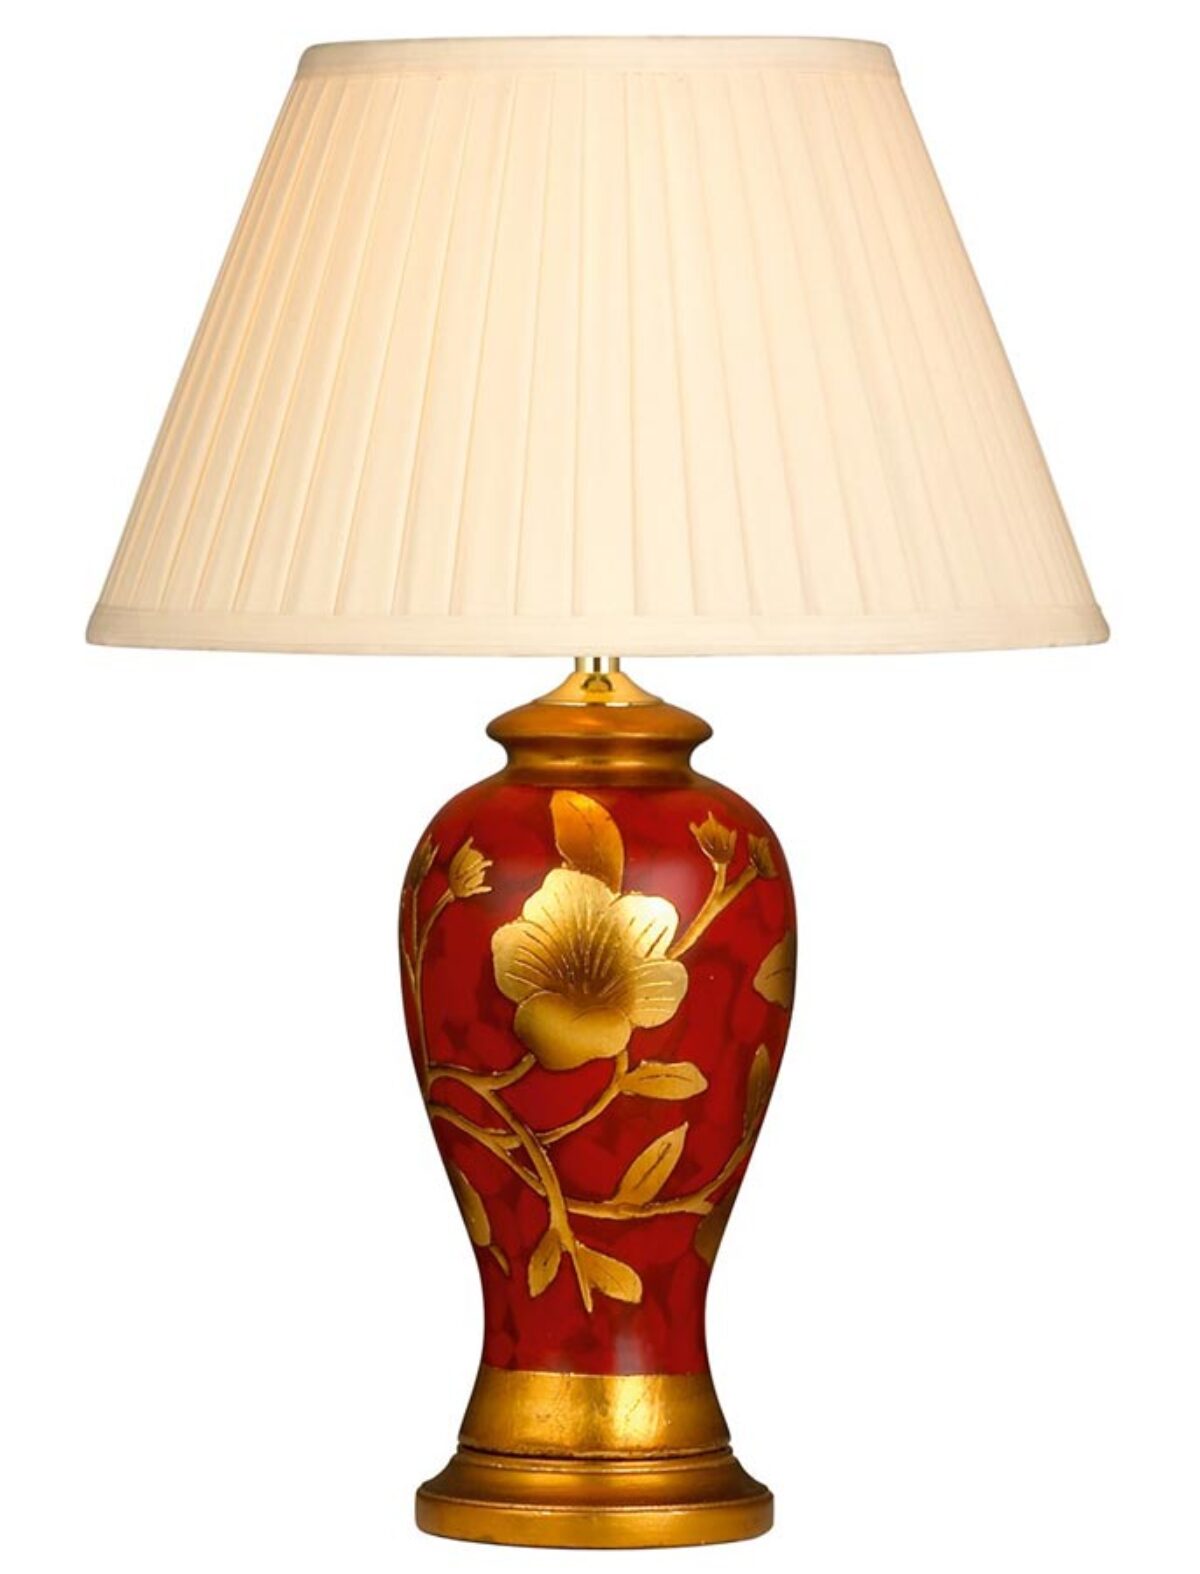 Gold Ceramic Table Lamp Cream Pleat Shade, Small Red Table Lamp